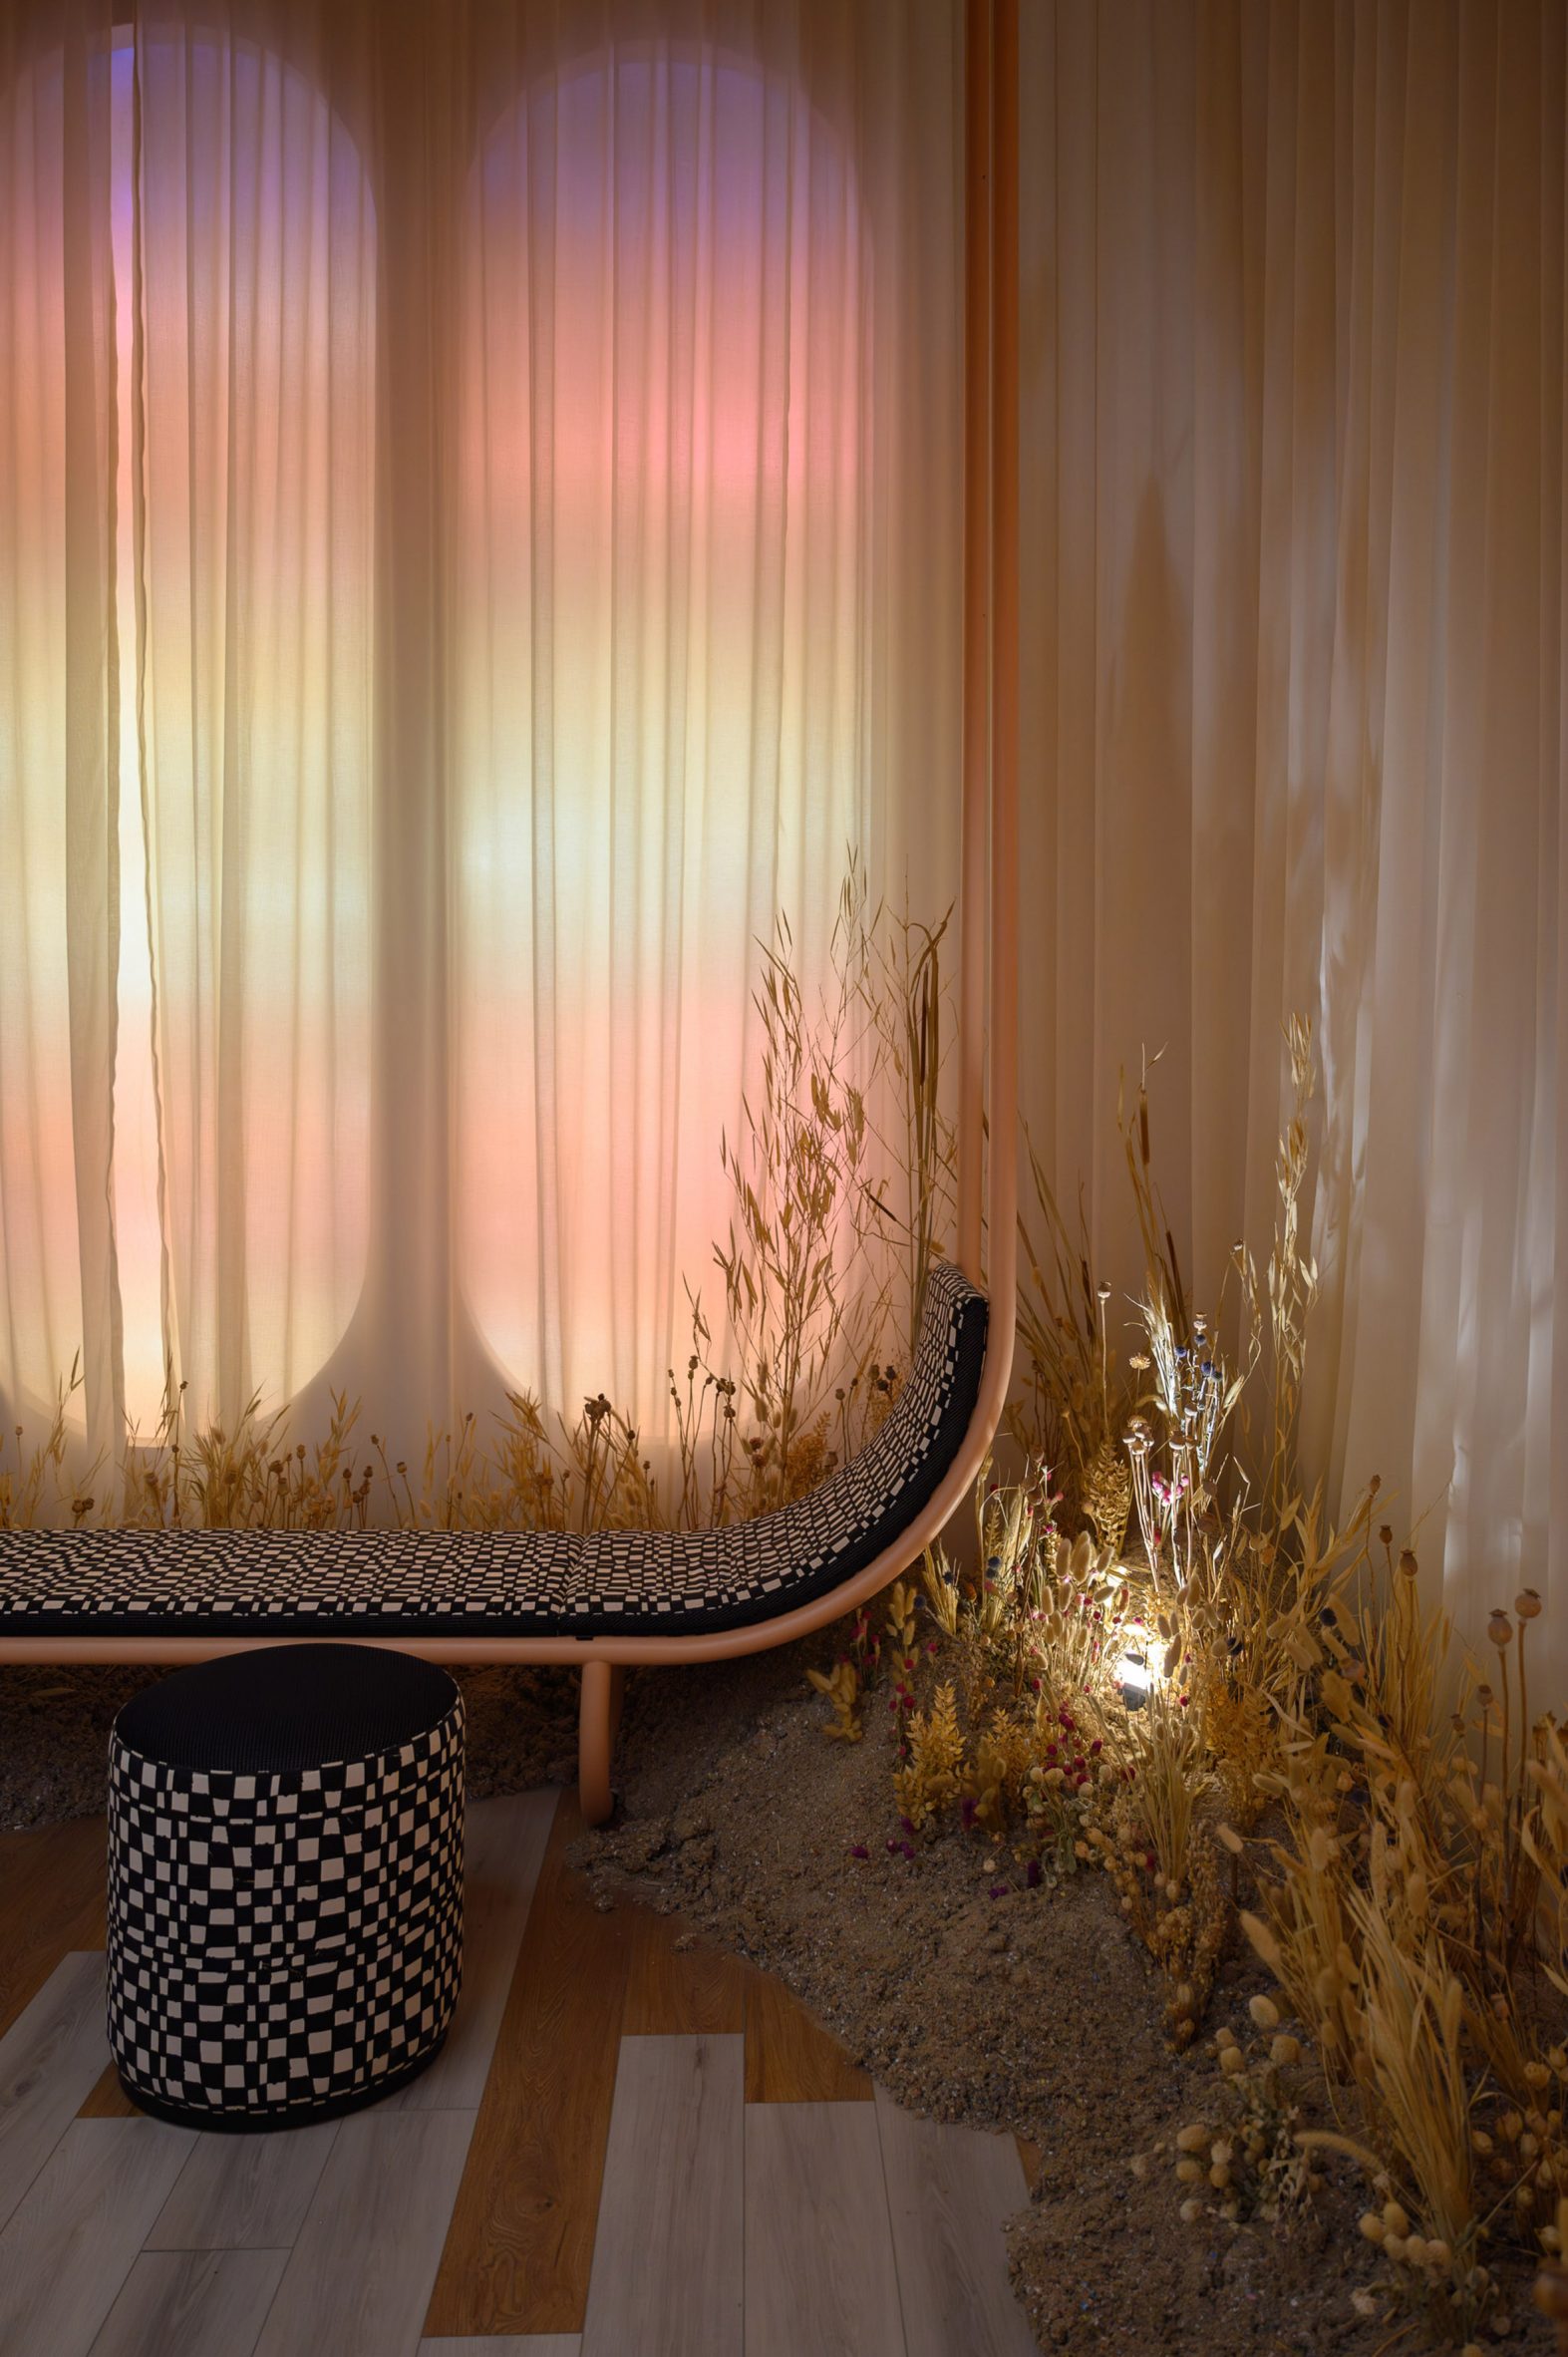 Panels illuminated to mimic a sunset installed behind translucent curtains